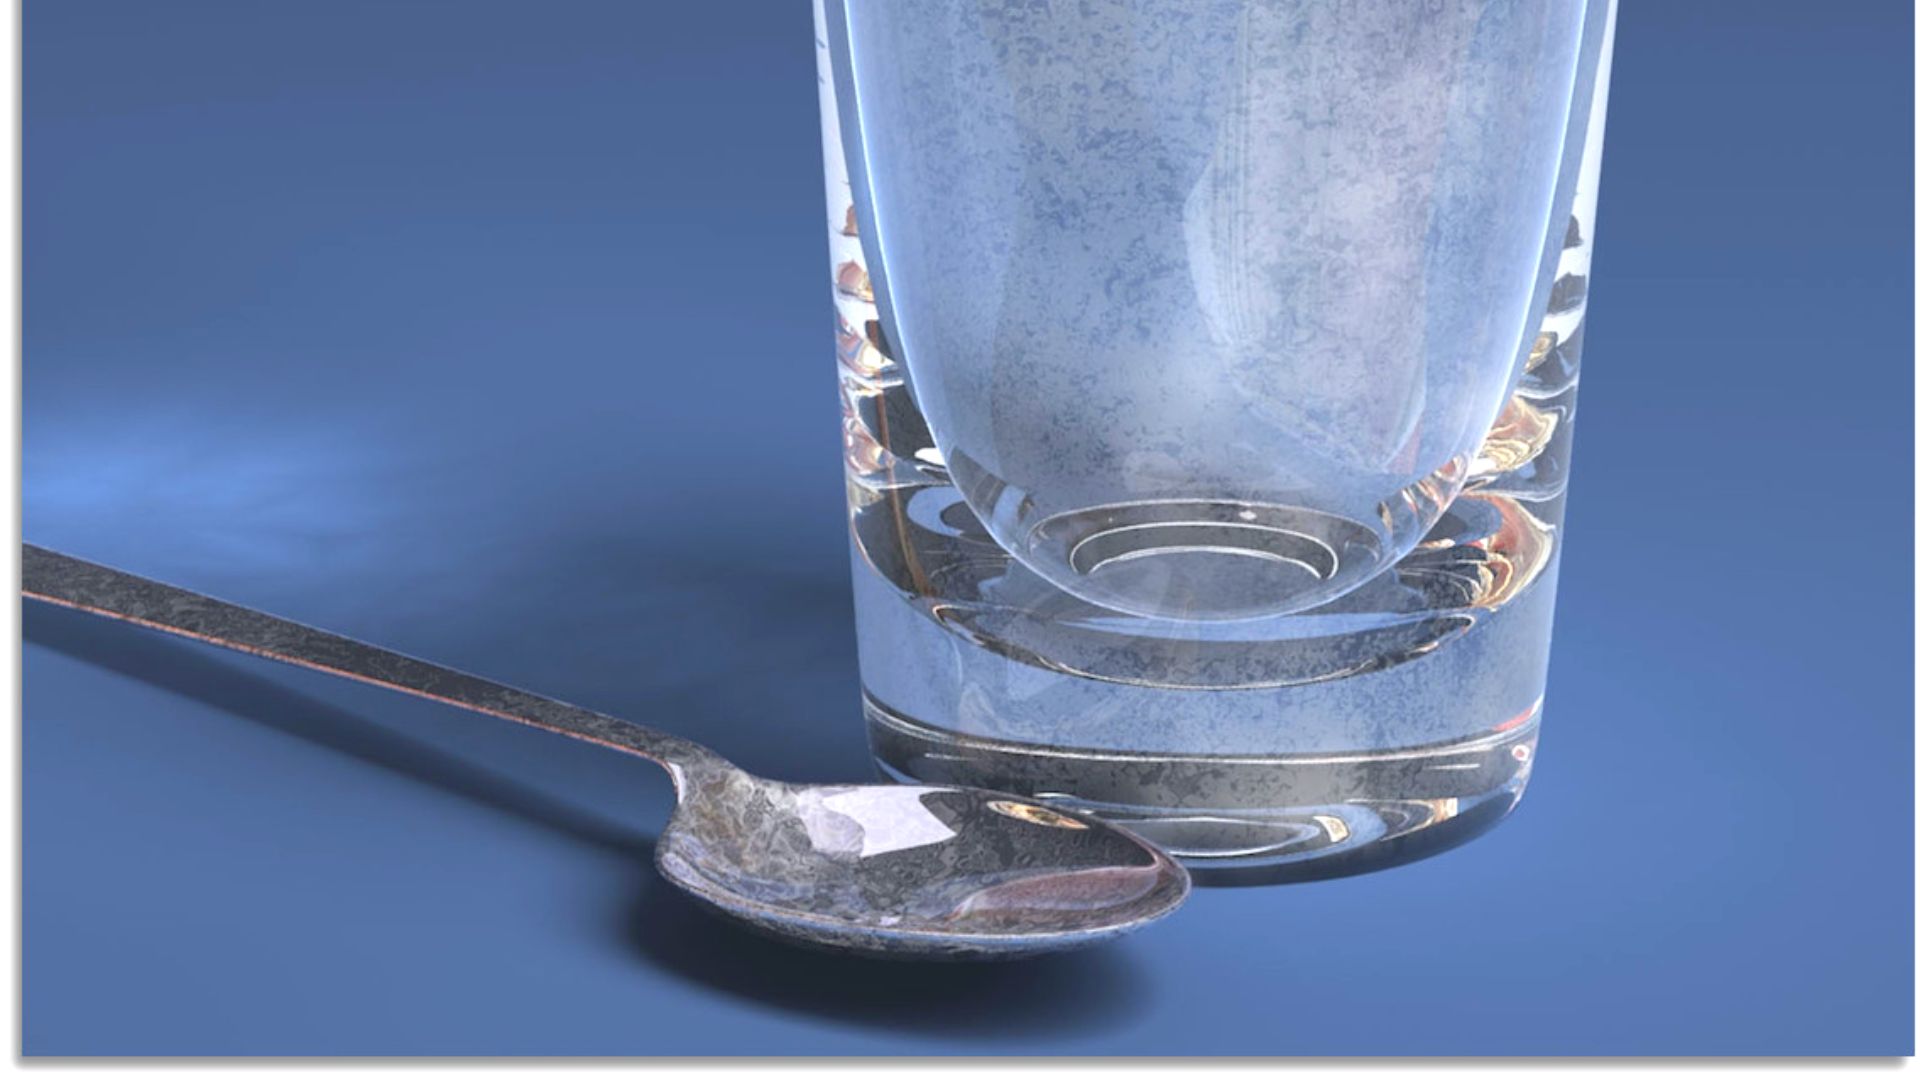 Hard Water On Glass And Spoon